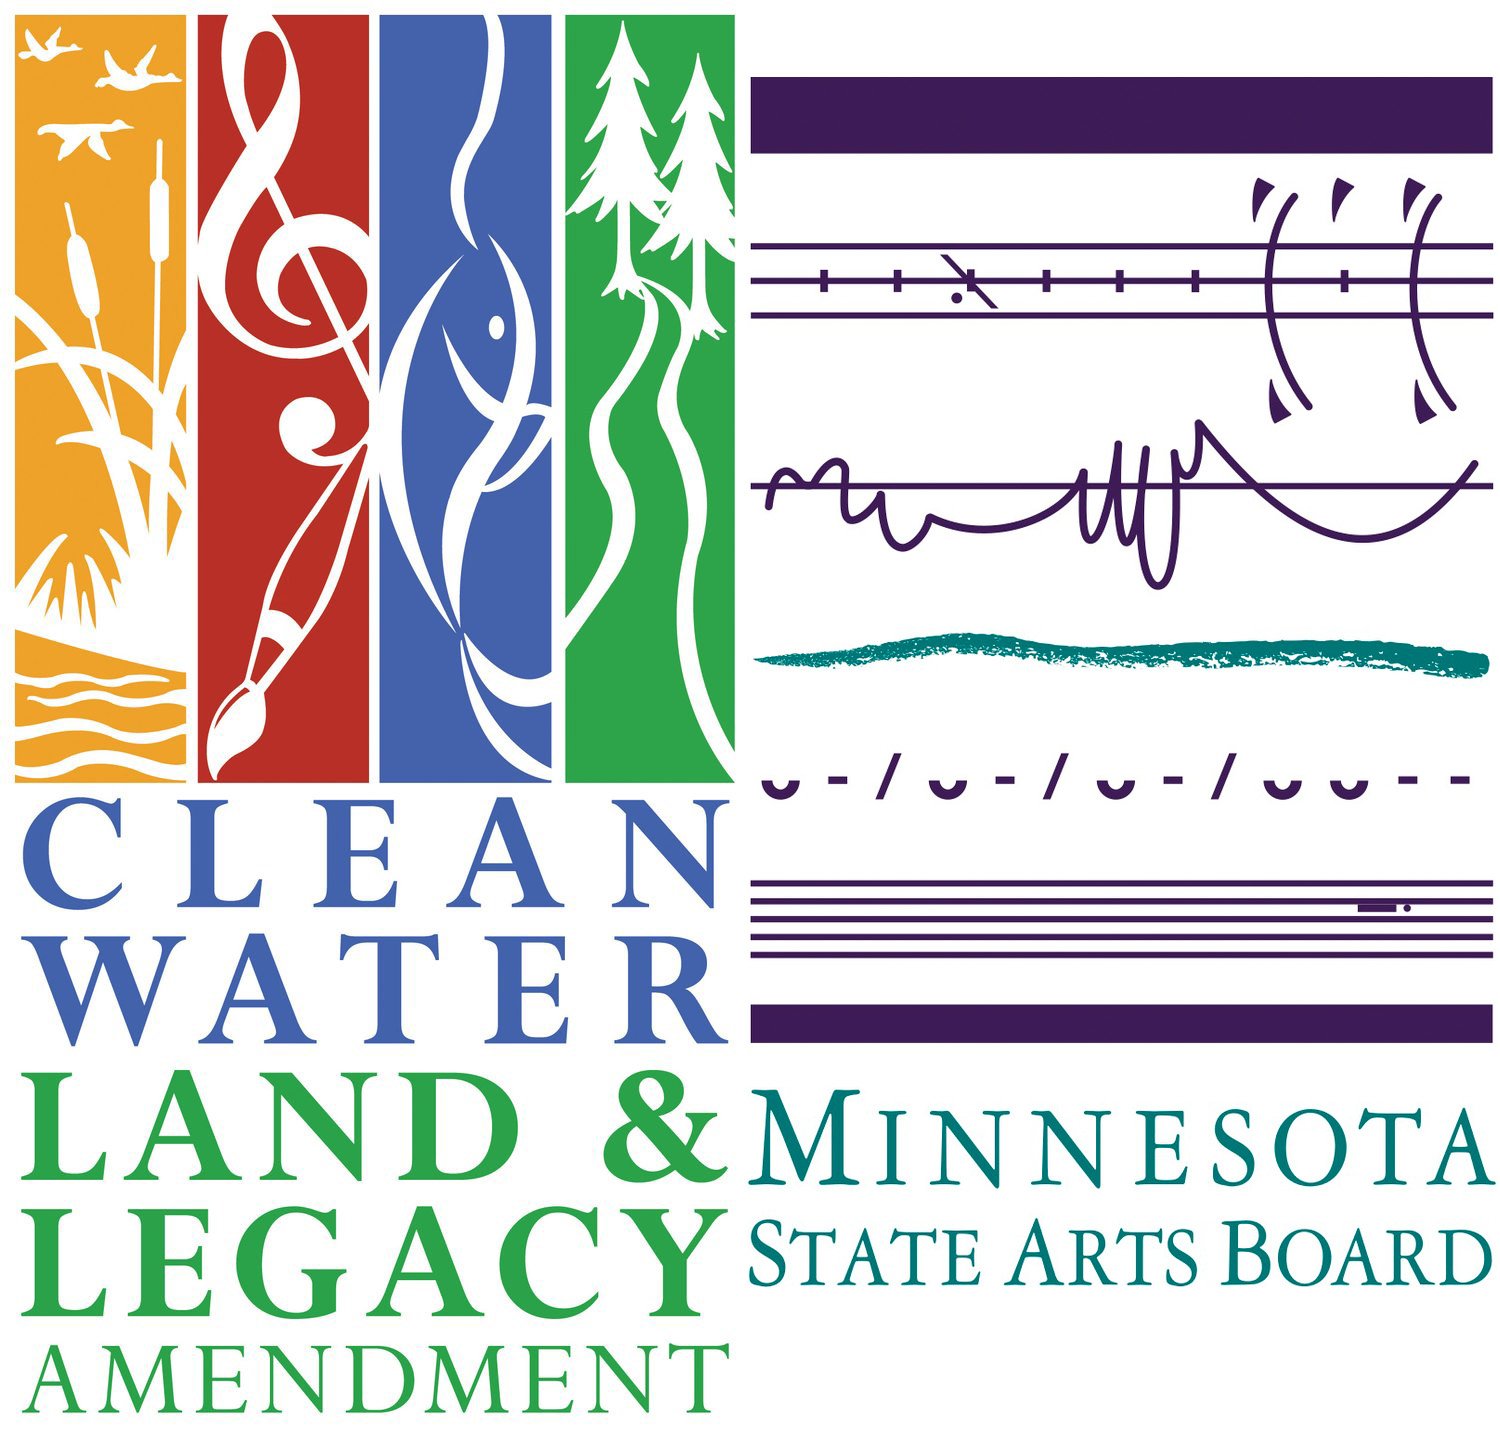  Adam Swanson is a fiscal year 2022 recipient of a Creative Support for Individuals grant from the Minnesota State Arts Board. This activity is made possible by the voters of Minnesota through a grant from the Minnesota State Arts Board, thanks to a 